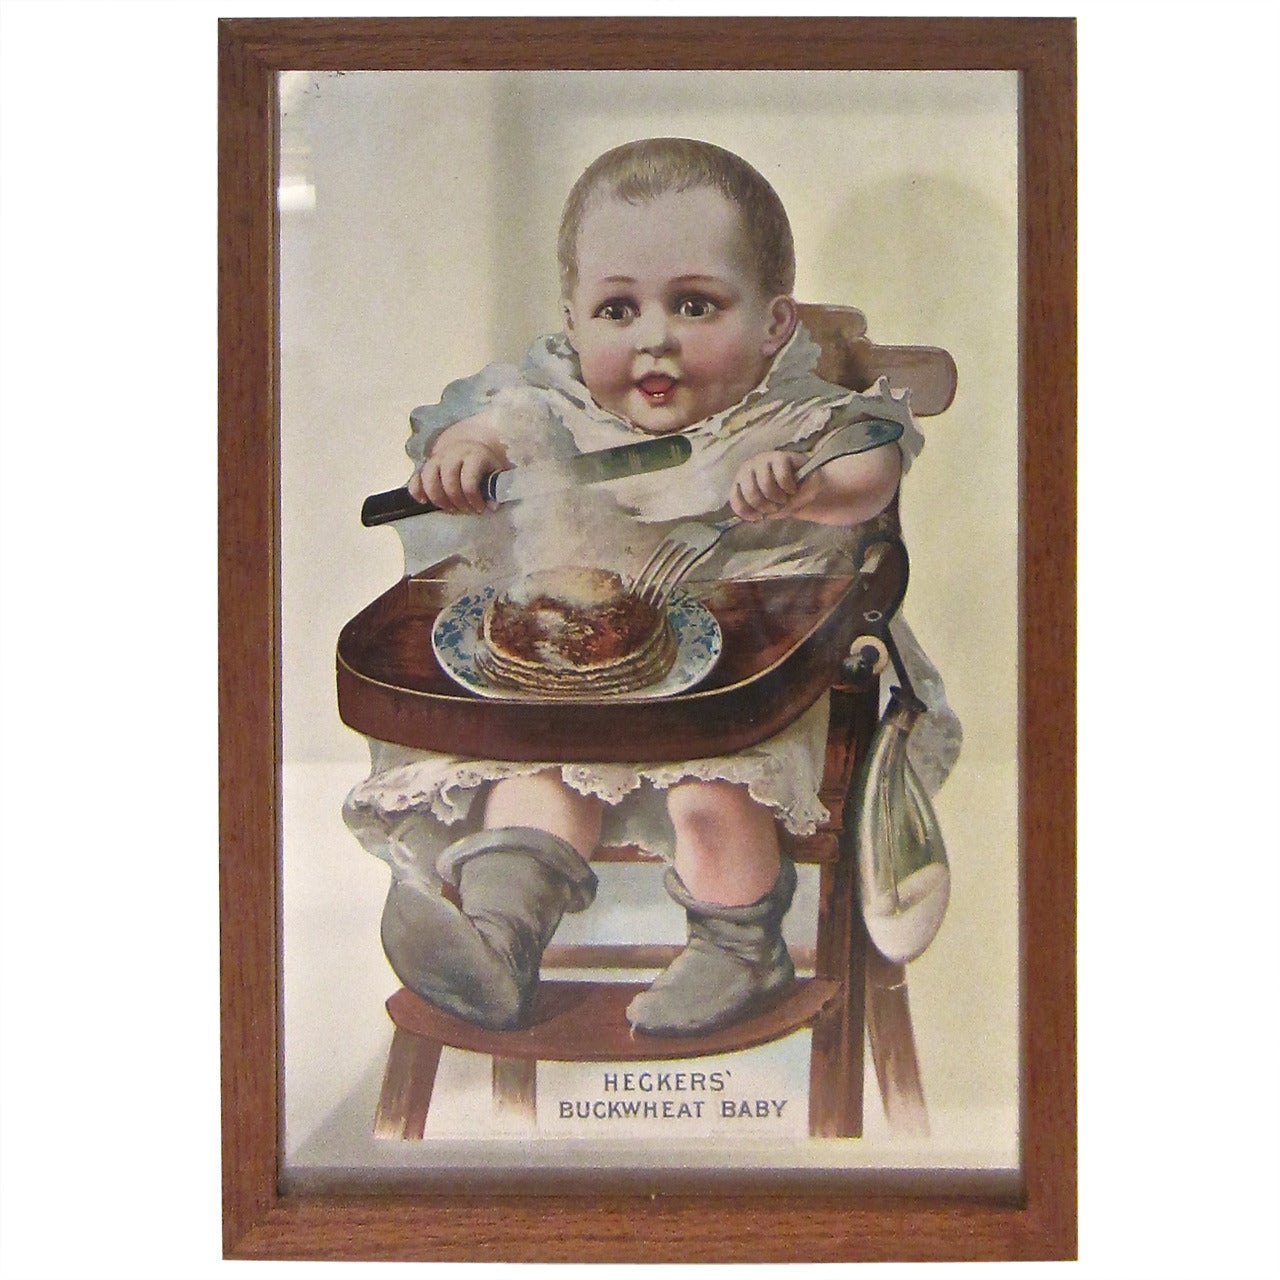 Heckers" Buckwheat Baby Advertising For Sale